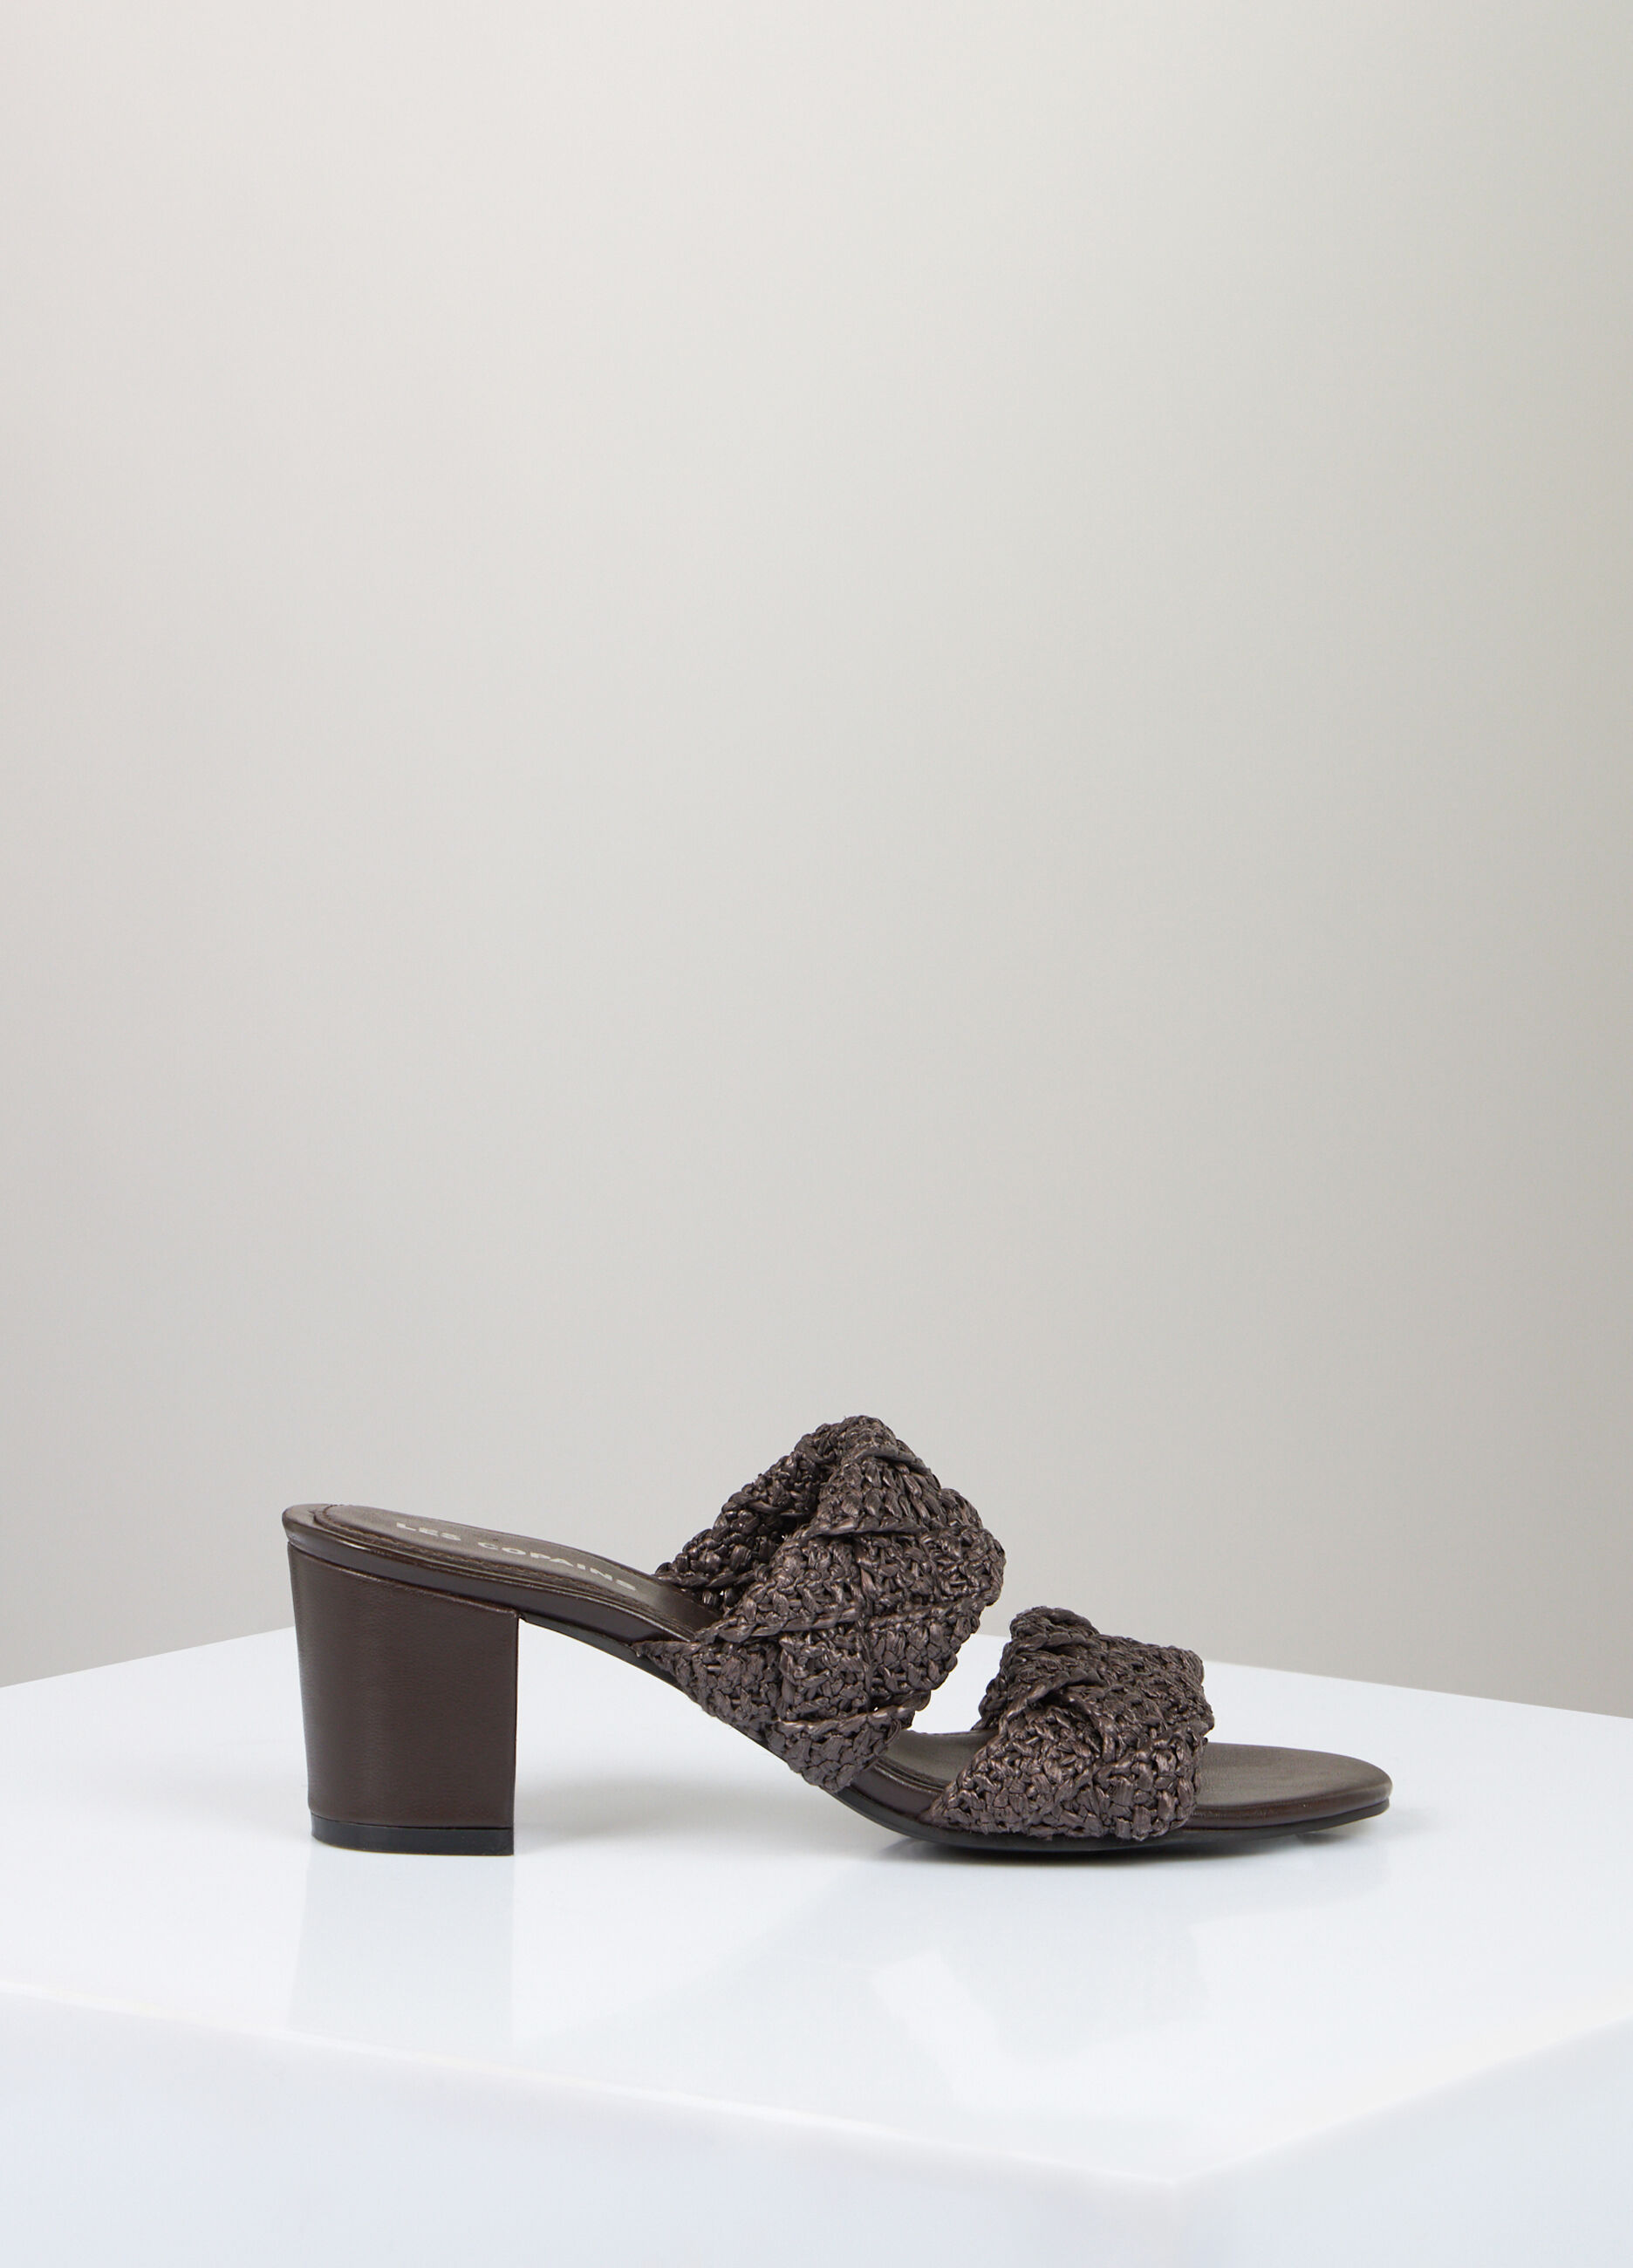 Band sandals in leather and raffia_2